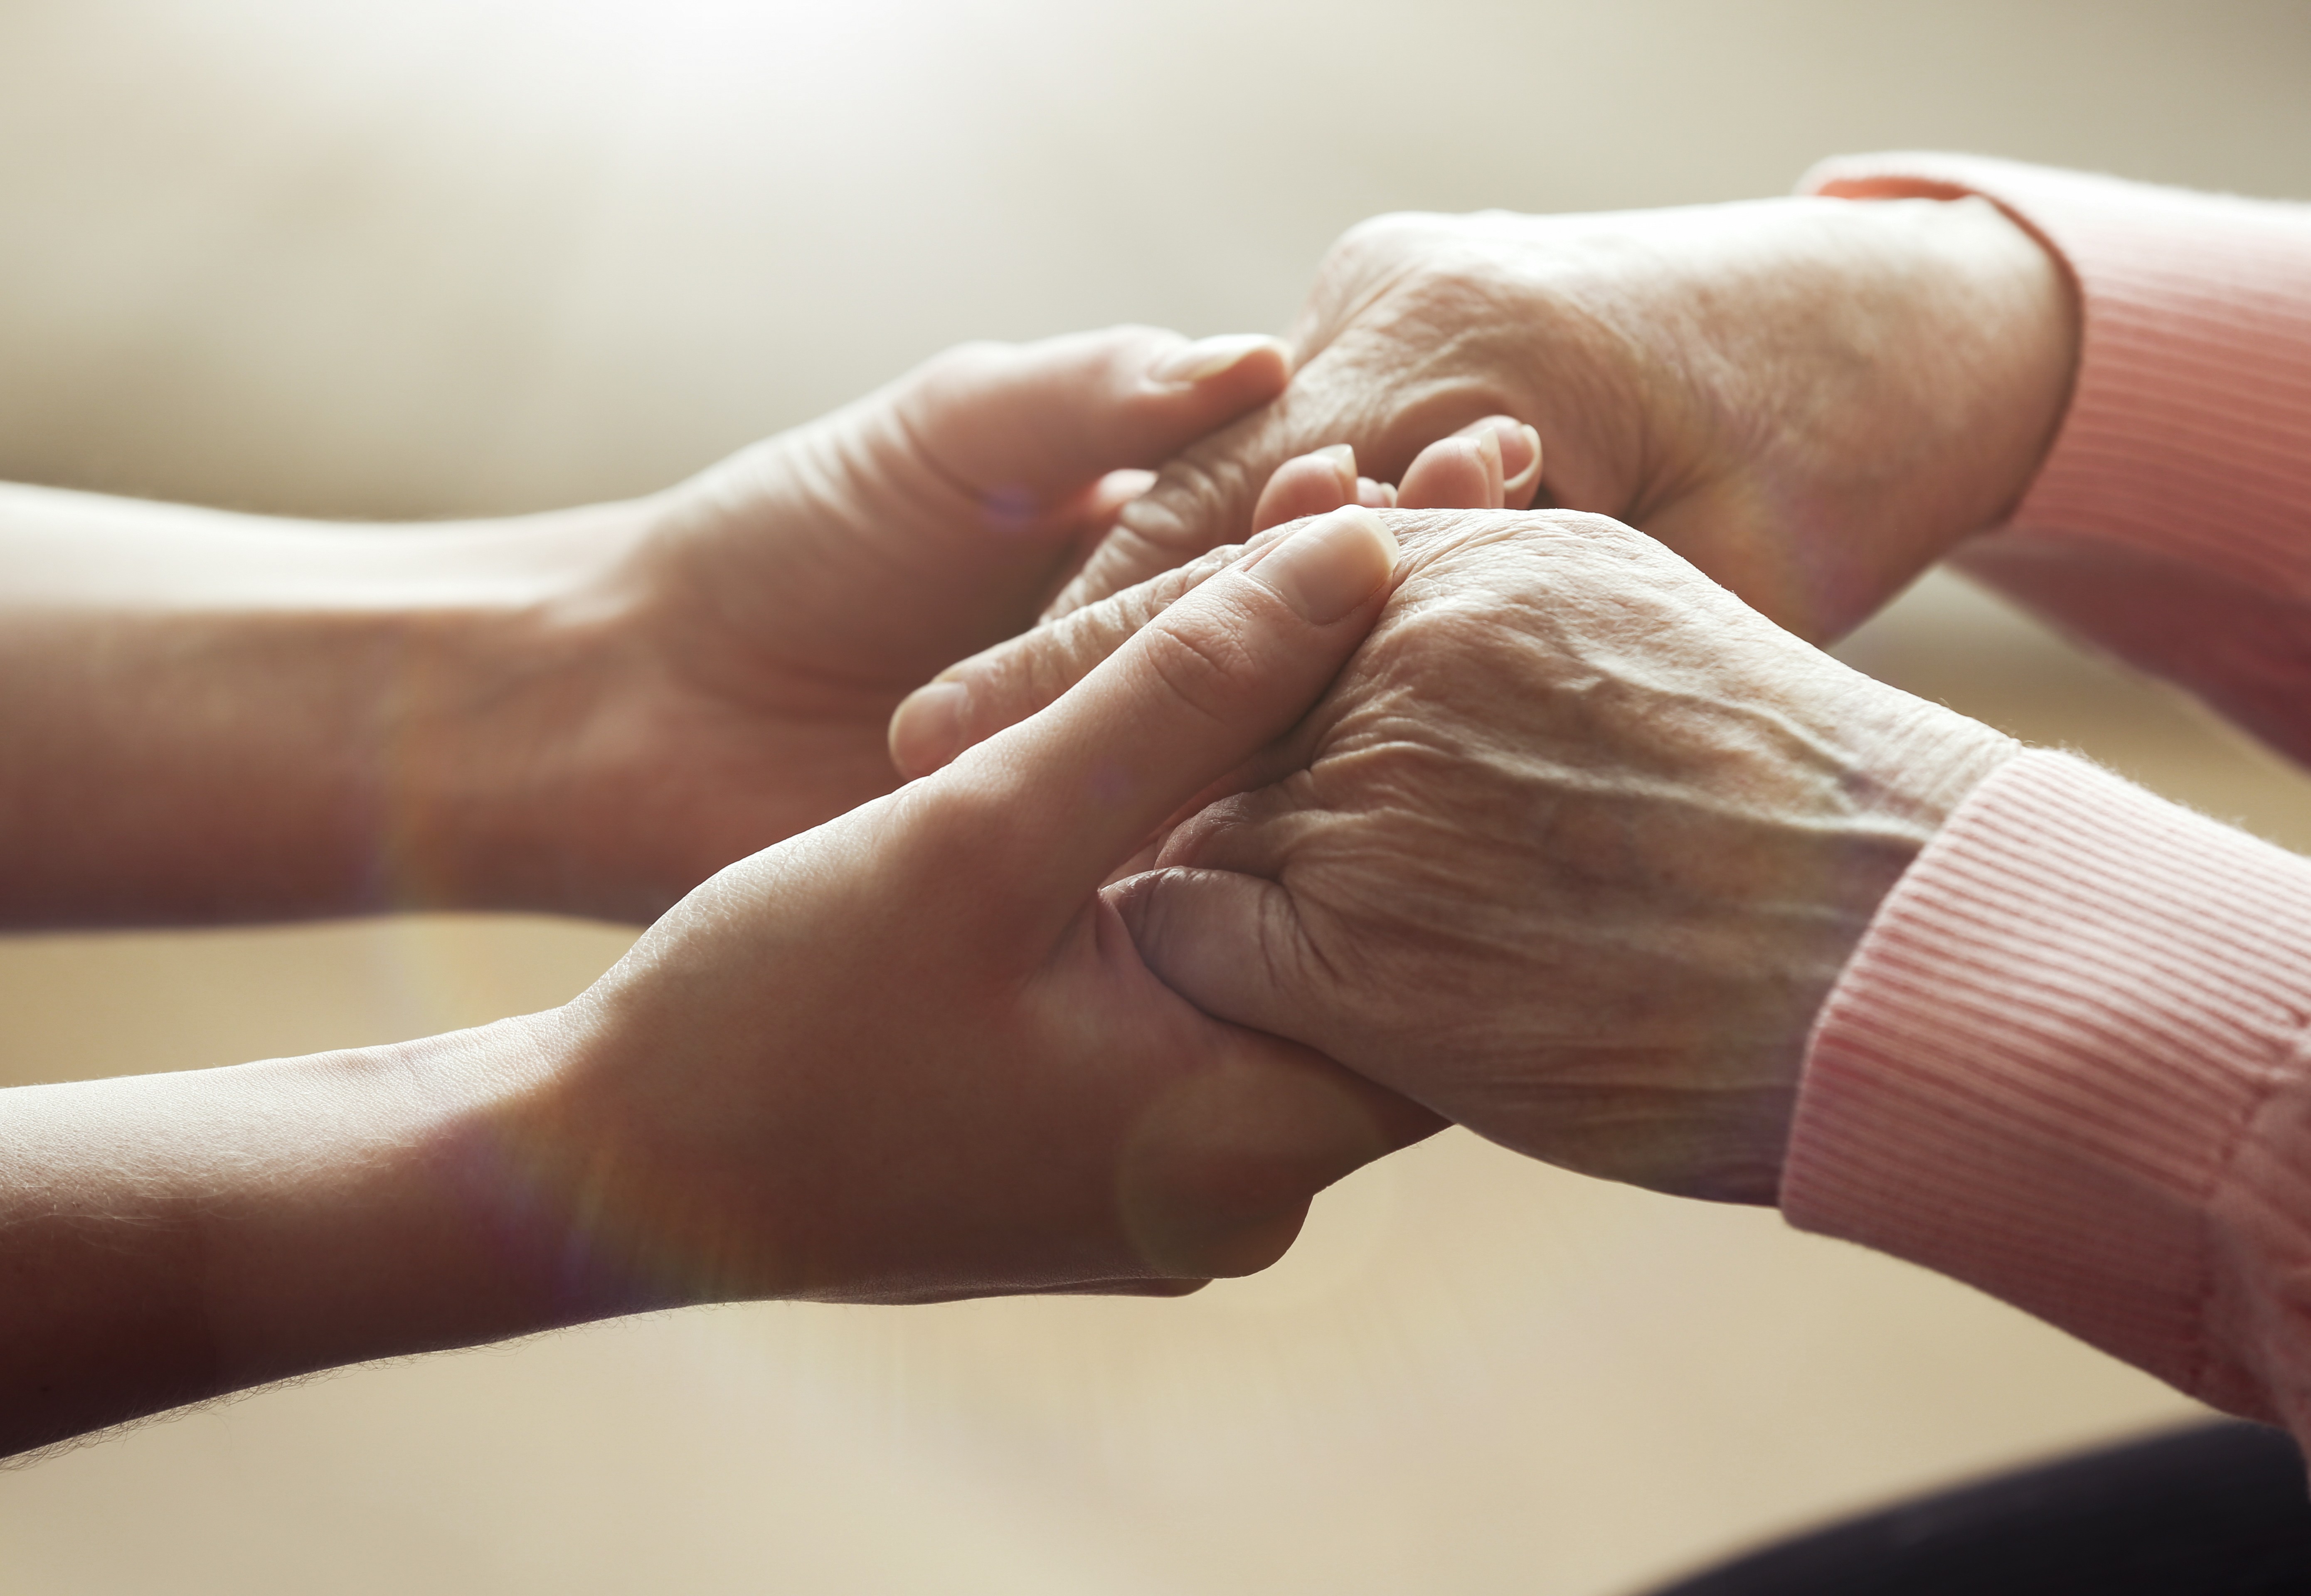 Comprehensive care for the terminally ill includes control of a patient’s symptoms or pain, psychological counselling for patients and their families, and spiritual support for those who want it. Photo: Shutterstock